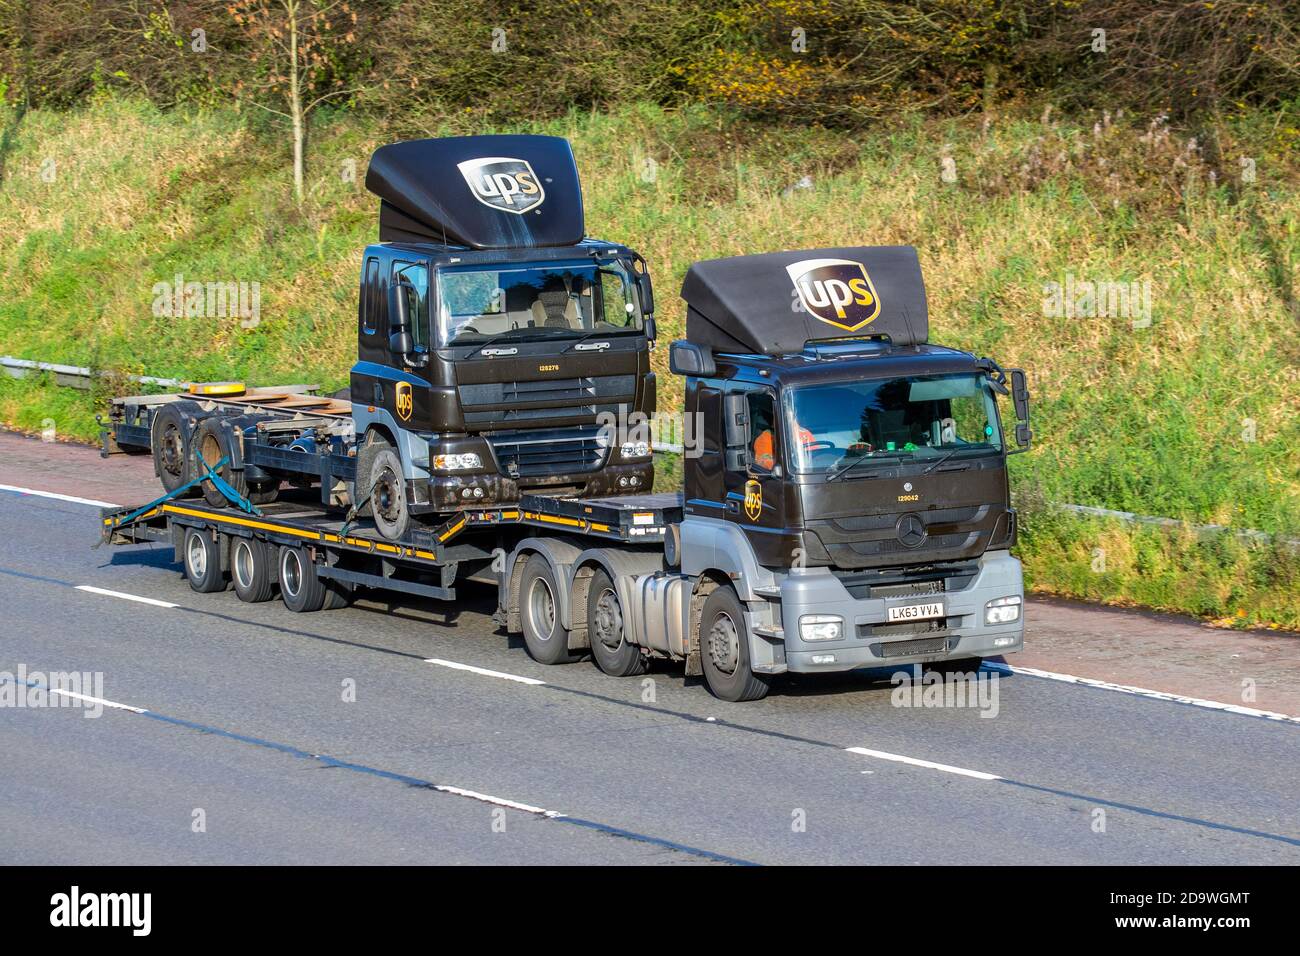 UPS, United Parcel Service an American multinational package delivery and supply chain postal management company; Motorway heavy bulk haulage lorry car transporter delivering trucks, haulage, carrier transportation, Mercedes Axor truck on low-loader, special cargo, Scania vehicle, UPS Package Car delivery, recover transport industry, parcel freight on the M61 at Manchester, UK Stock Photo